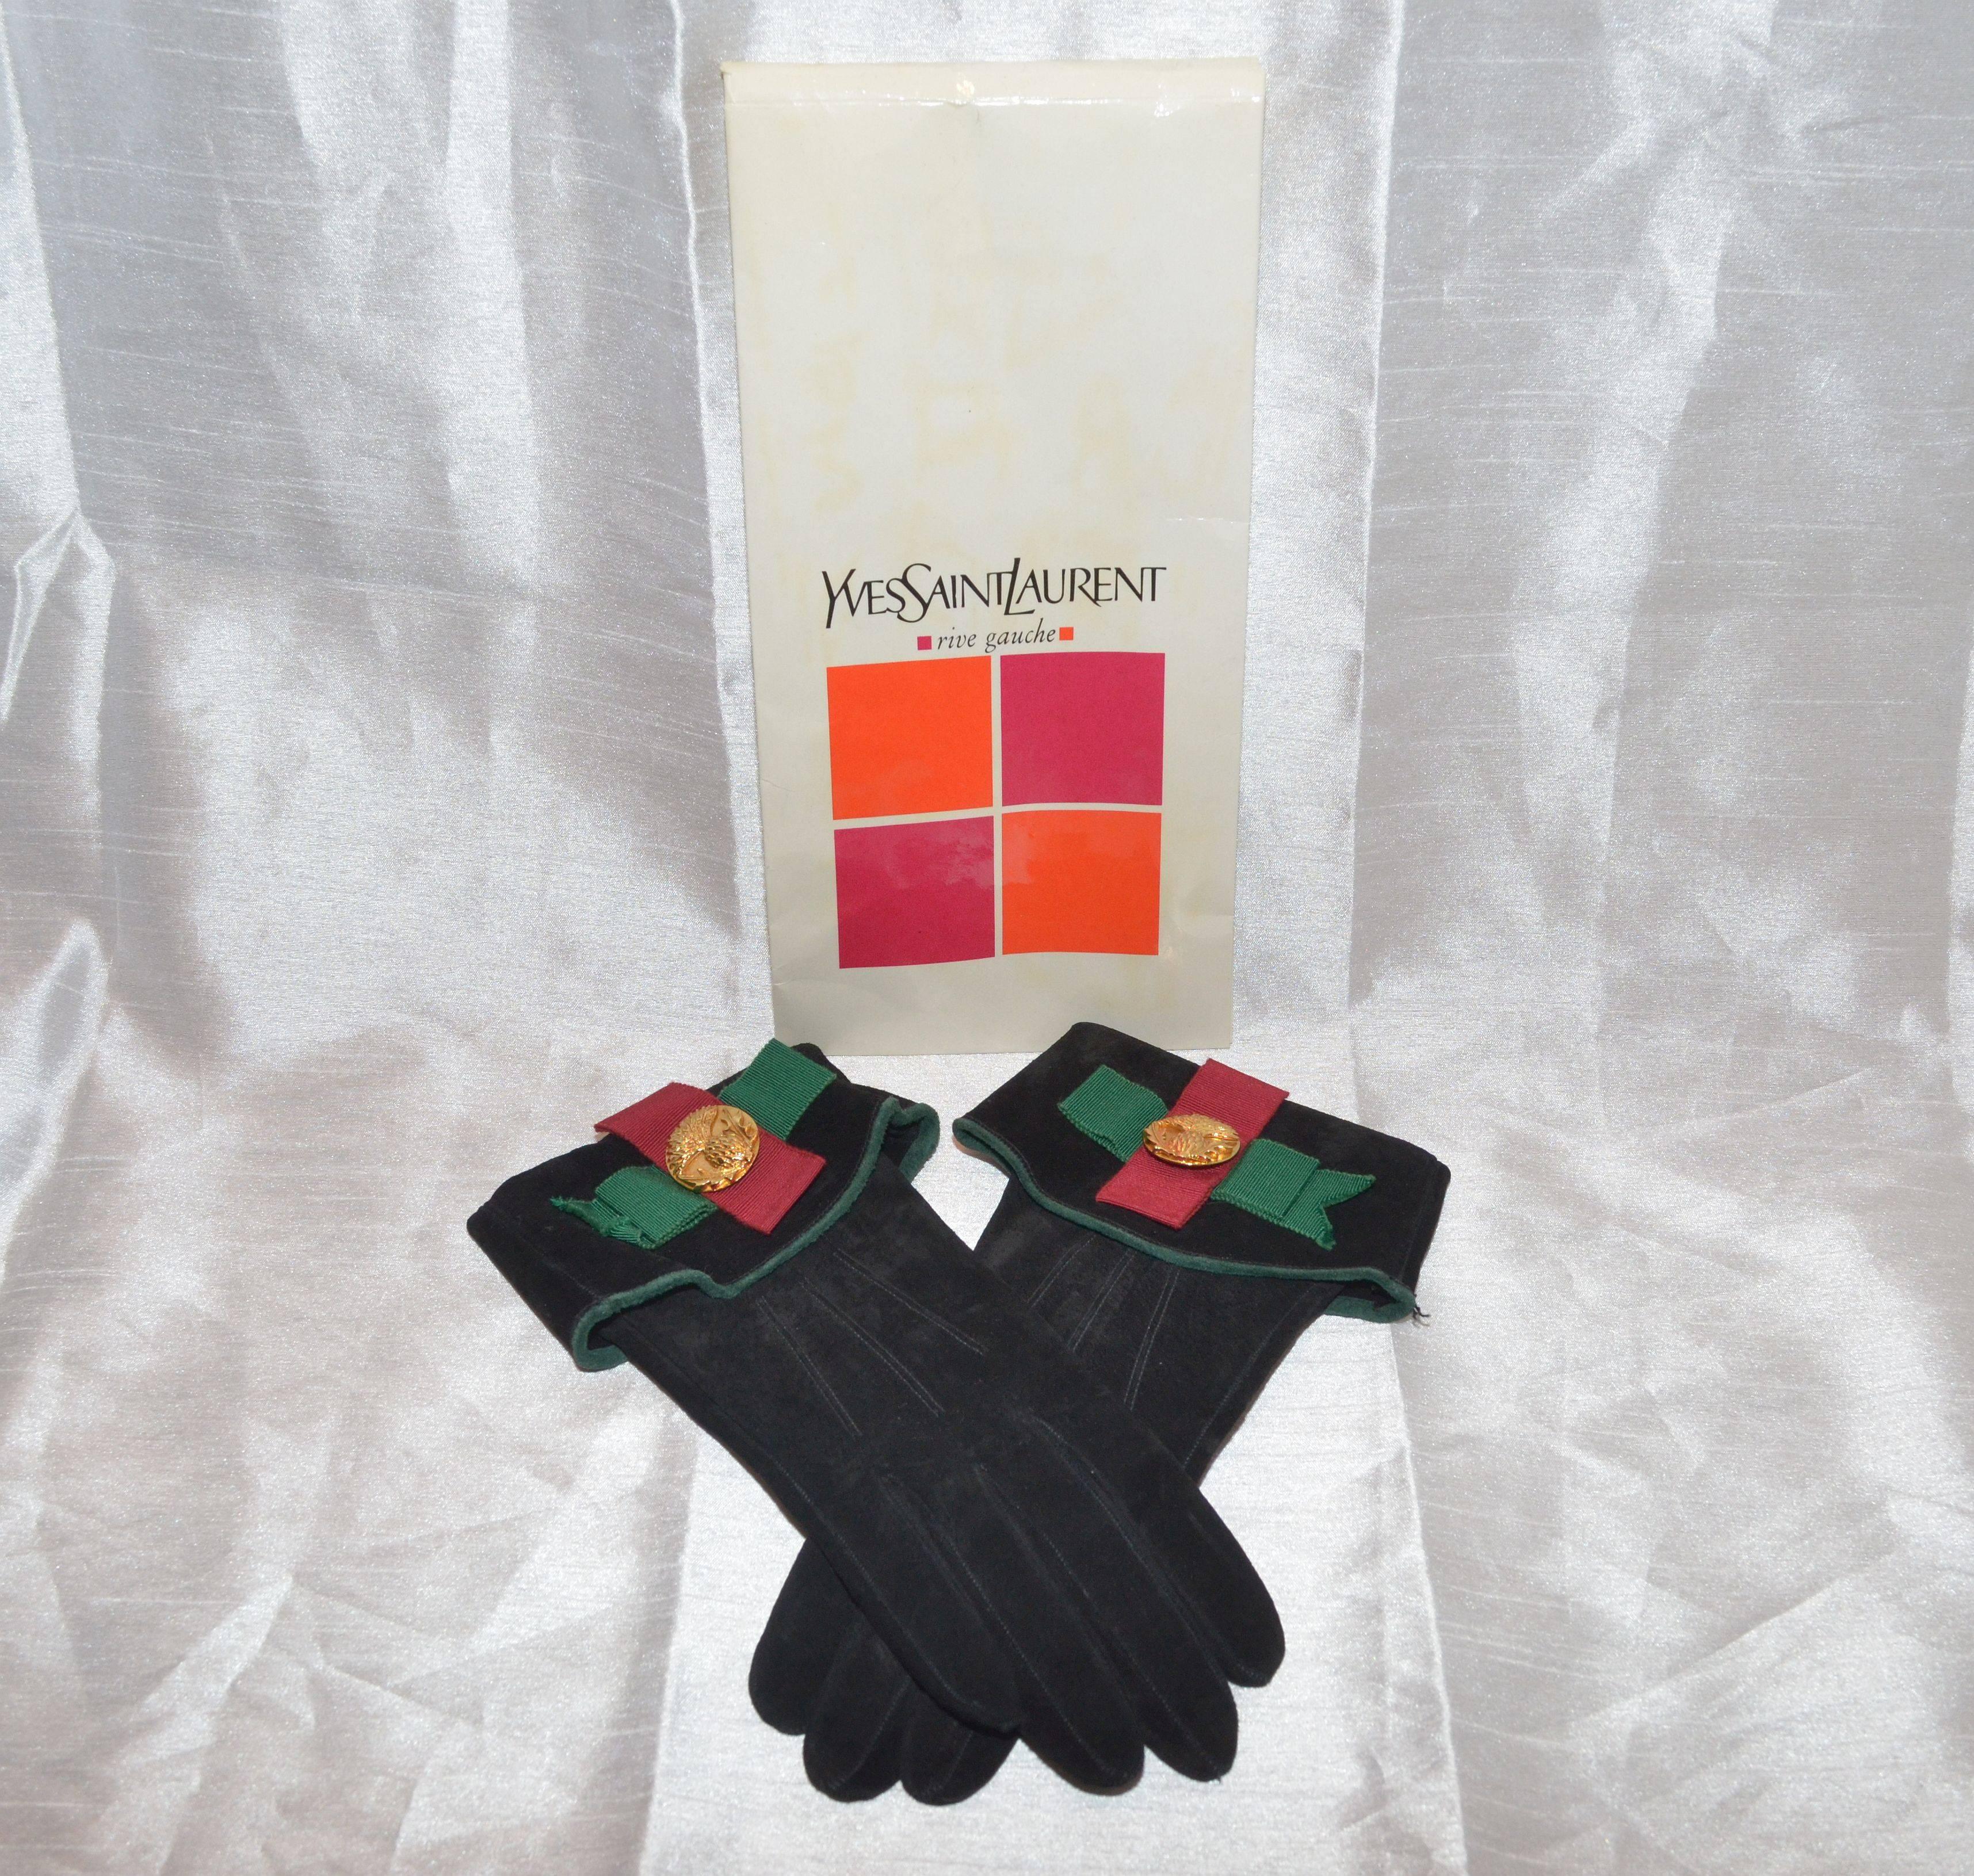 Yves Saint Laurent gloves in suede leather with red and green ribbon detail and a gold-tone metal center applique at the opening. Gloves are labeled a size 6.5 and Made in France. Gloves include original packaging.

Opening length - 4.5''